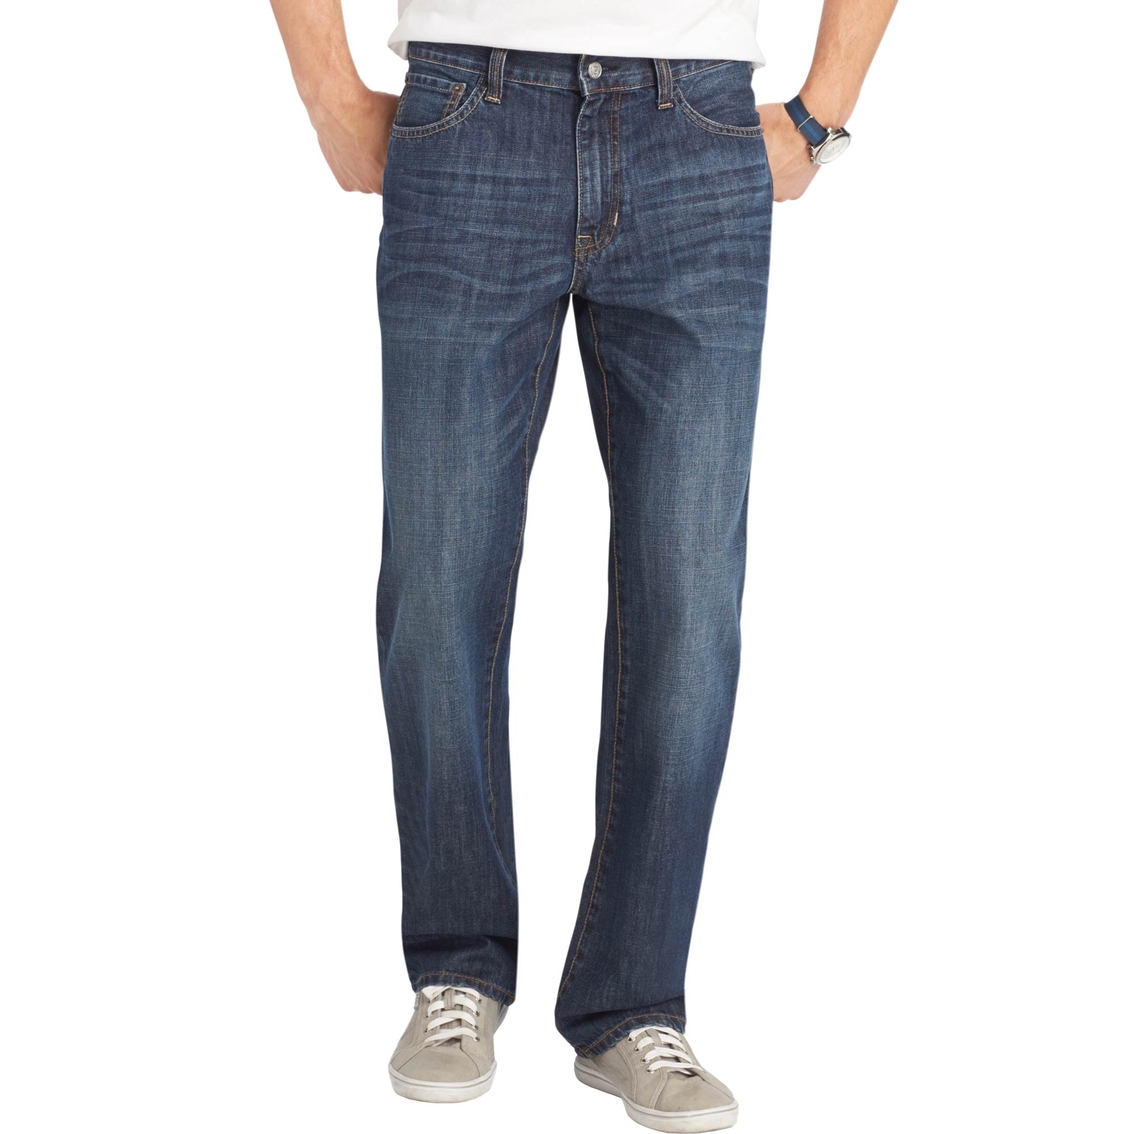 Izod Relaxed Fit Denim Jeans | Saturday - Wk 77 | Shop The Exchange